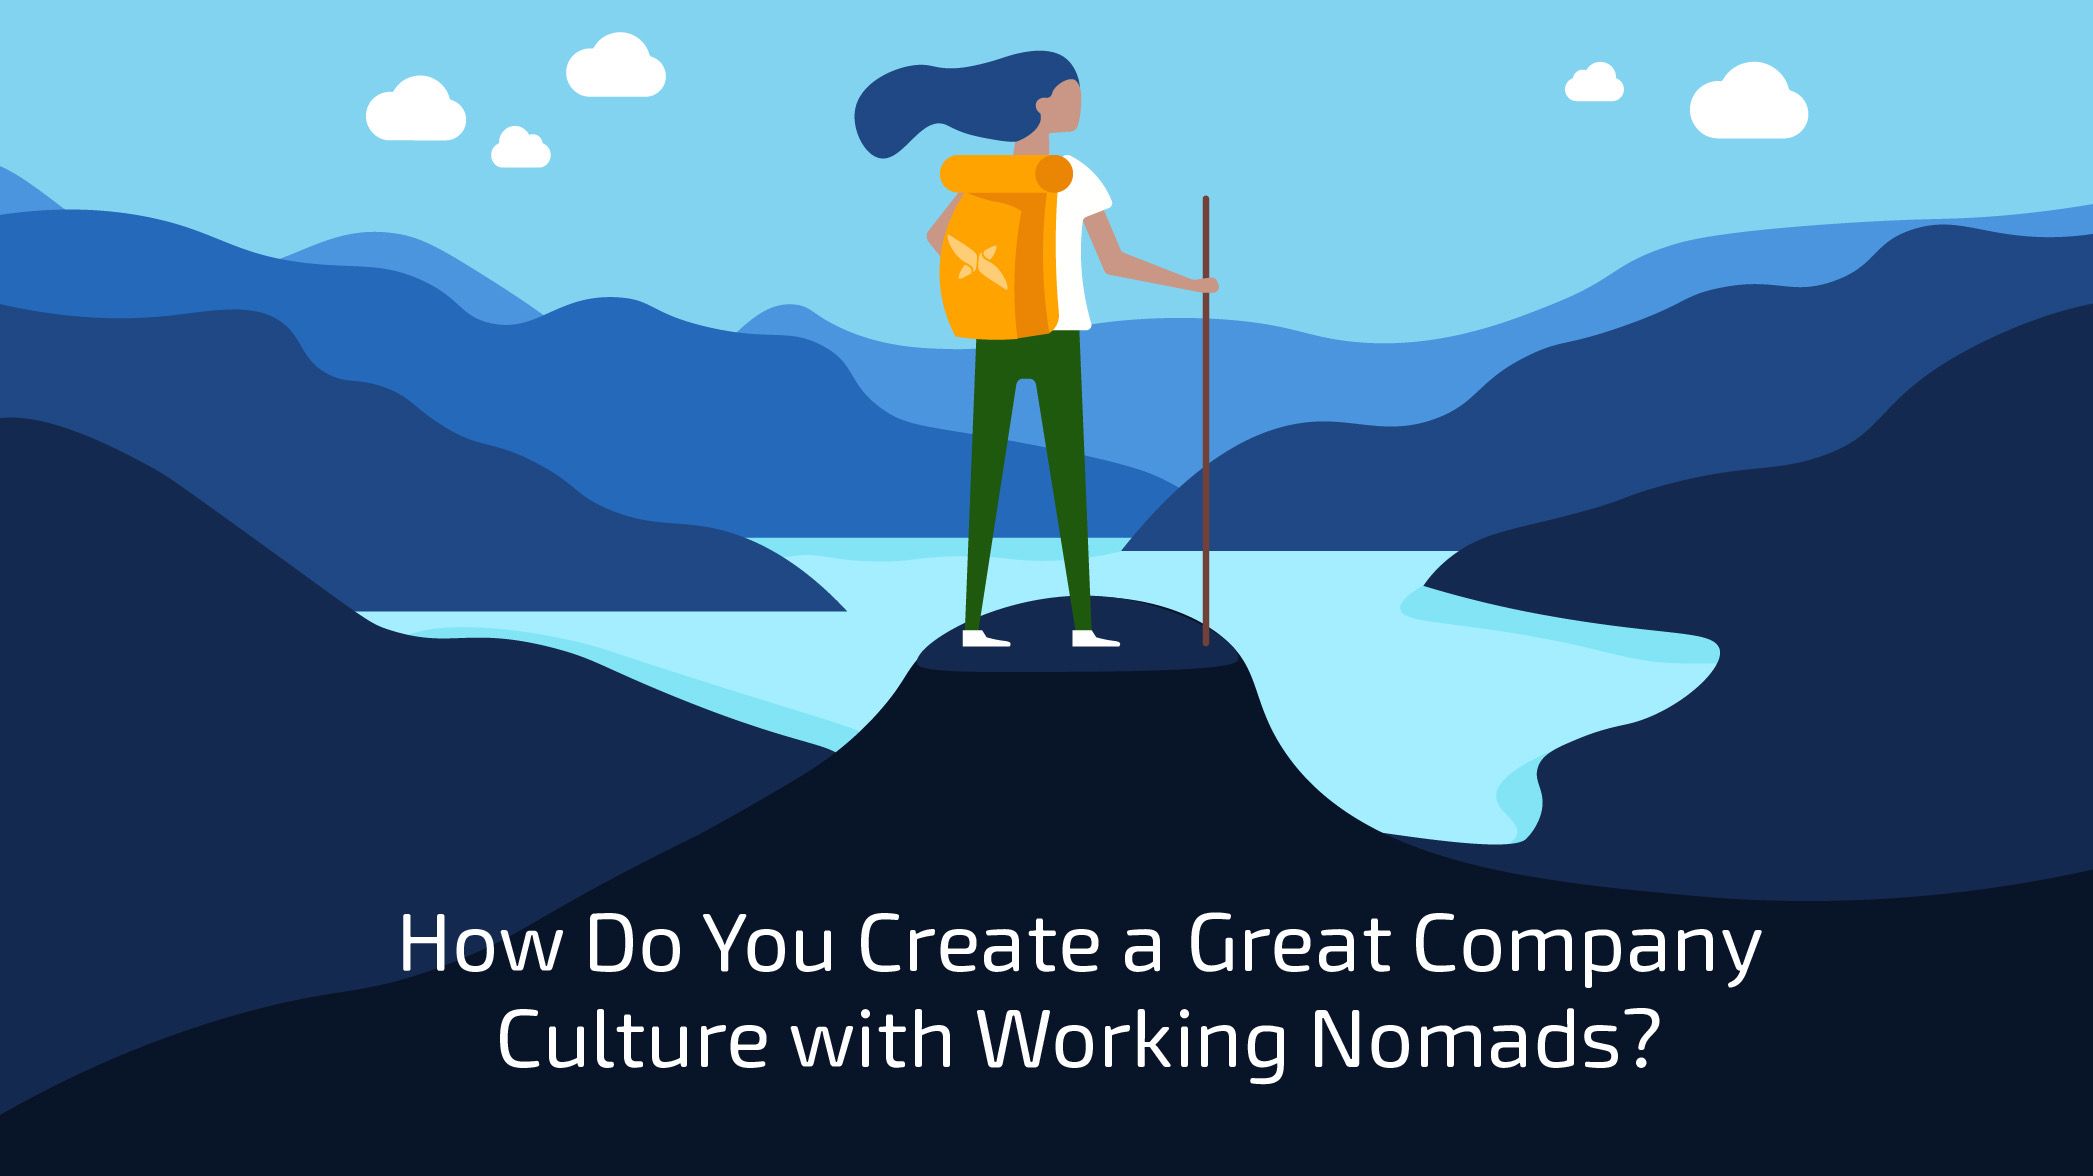 How Do You Create a Great Company Culture with Working Nomads?